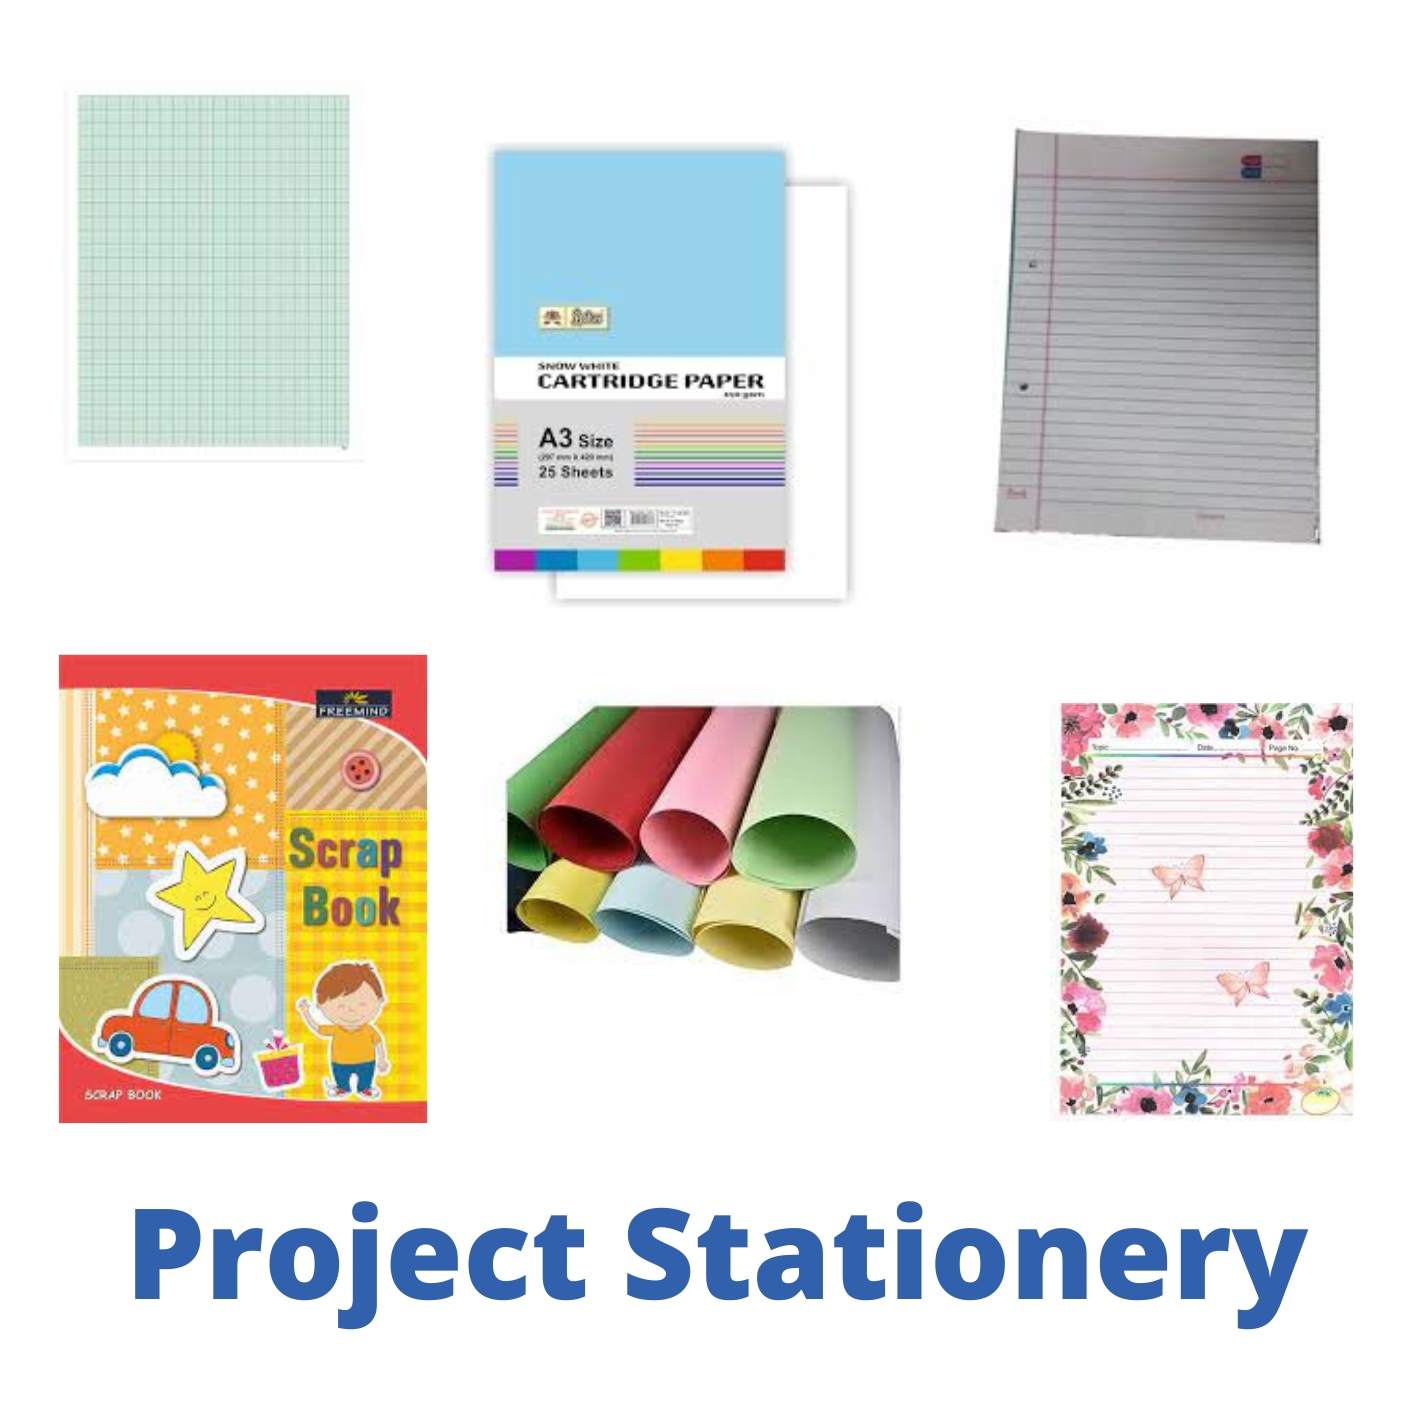 Project Stationery